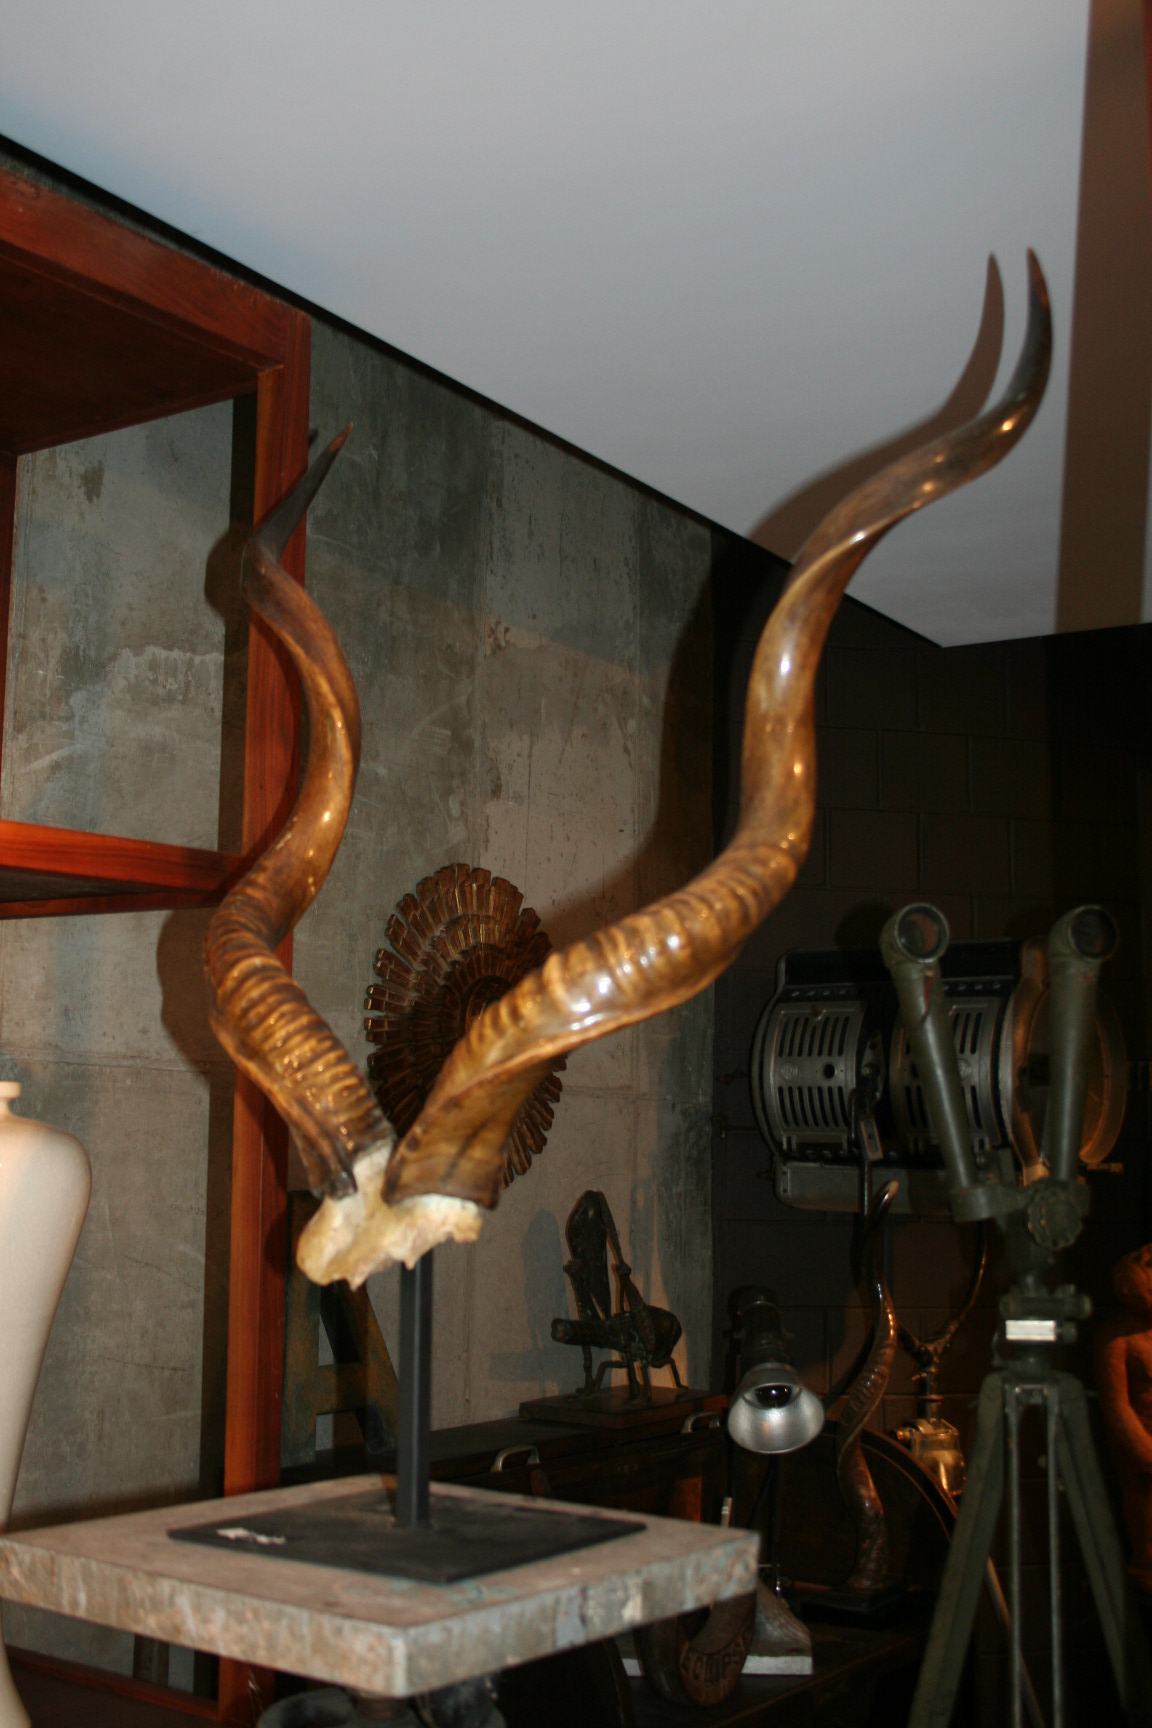 A spectacular pair of 19th century Kudu horns mounted on a contemporary base.